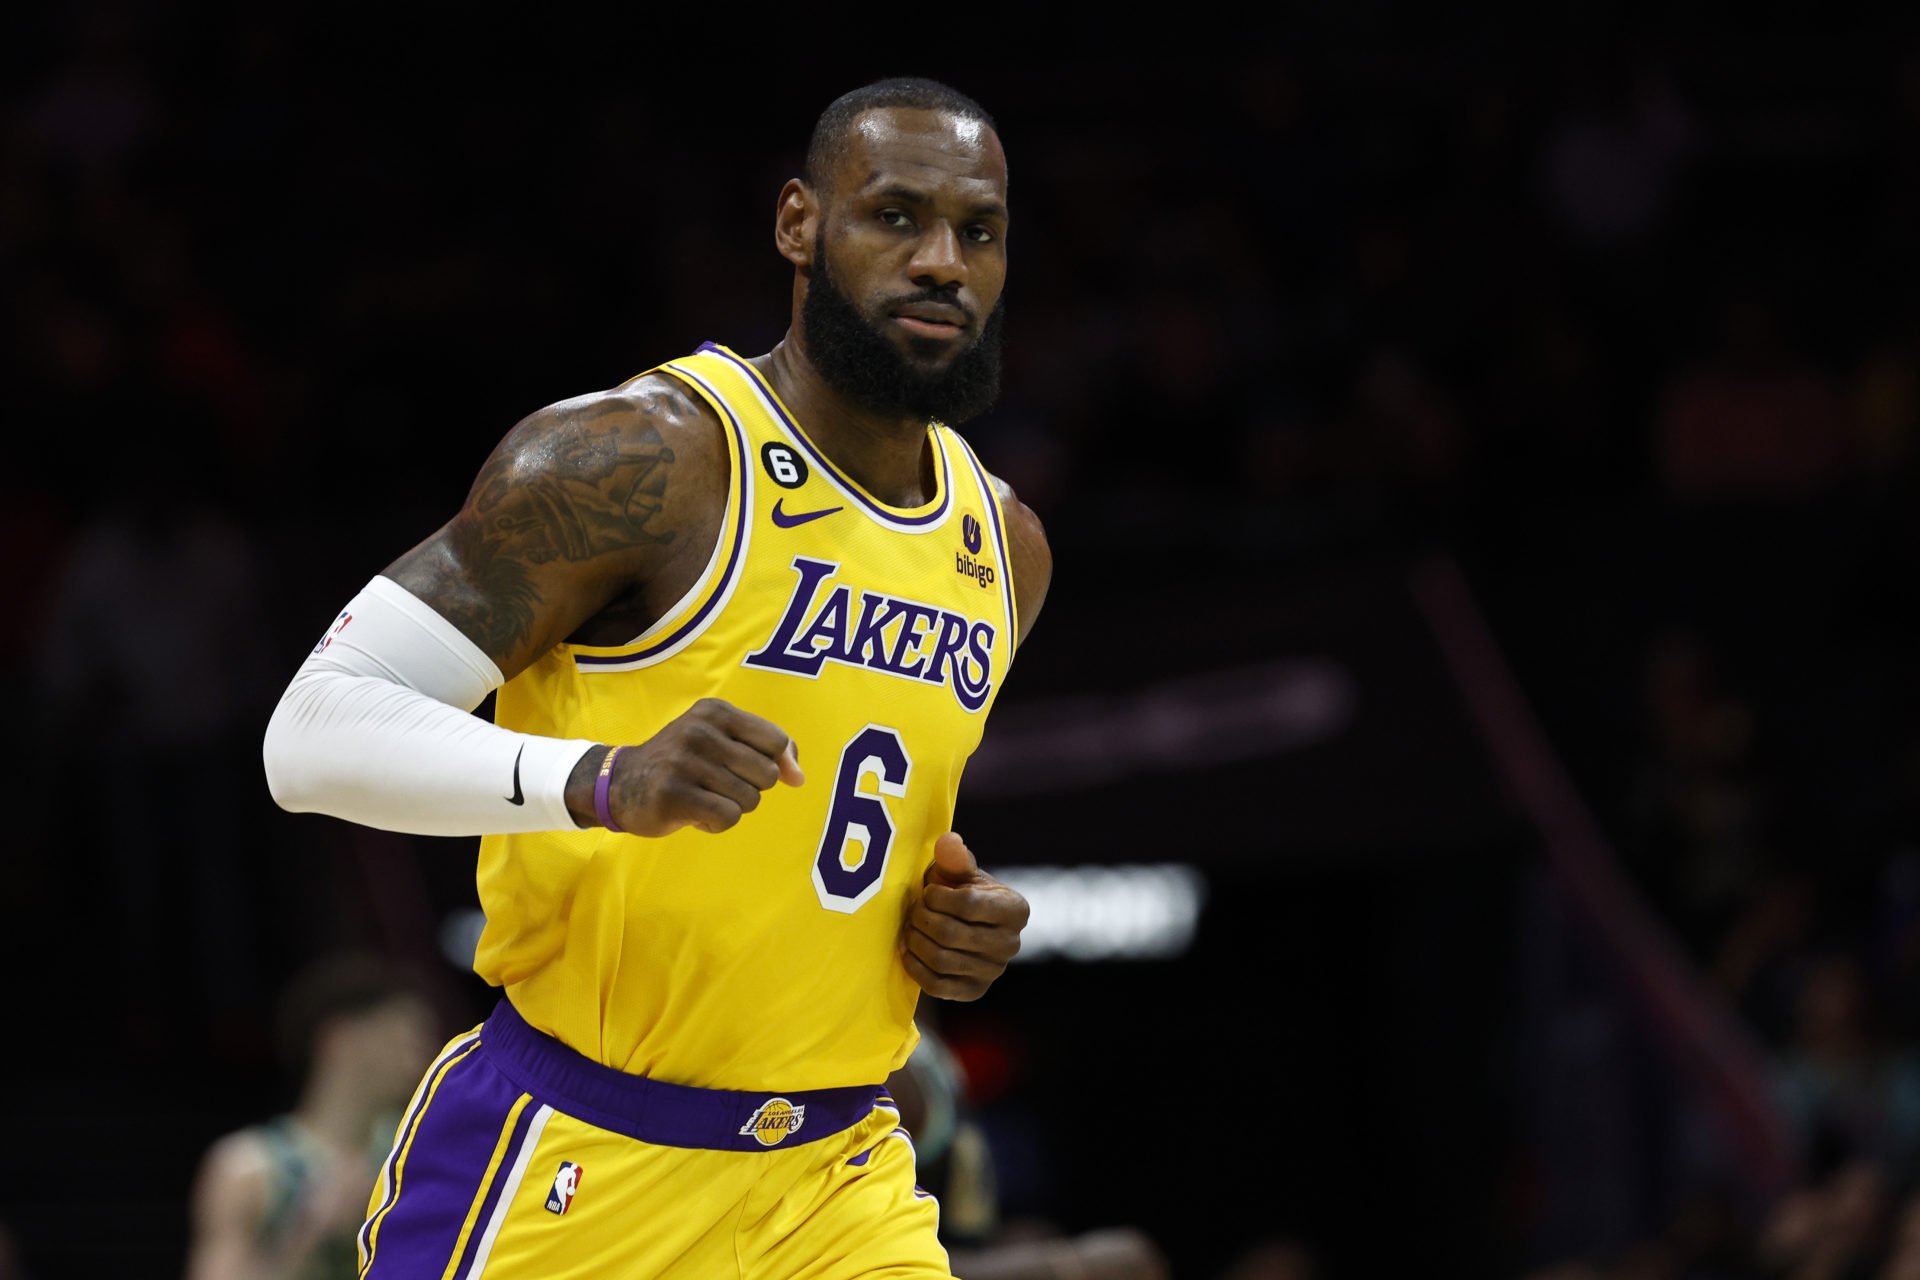 LeBron James listens to Beethoven before games and NBA fans have serious jokes